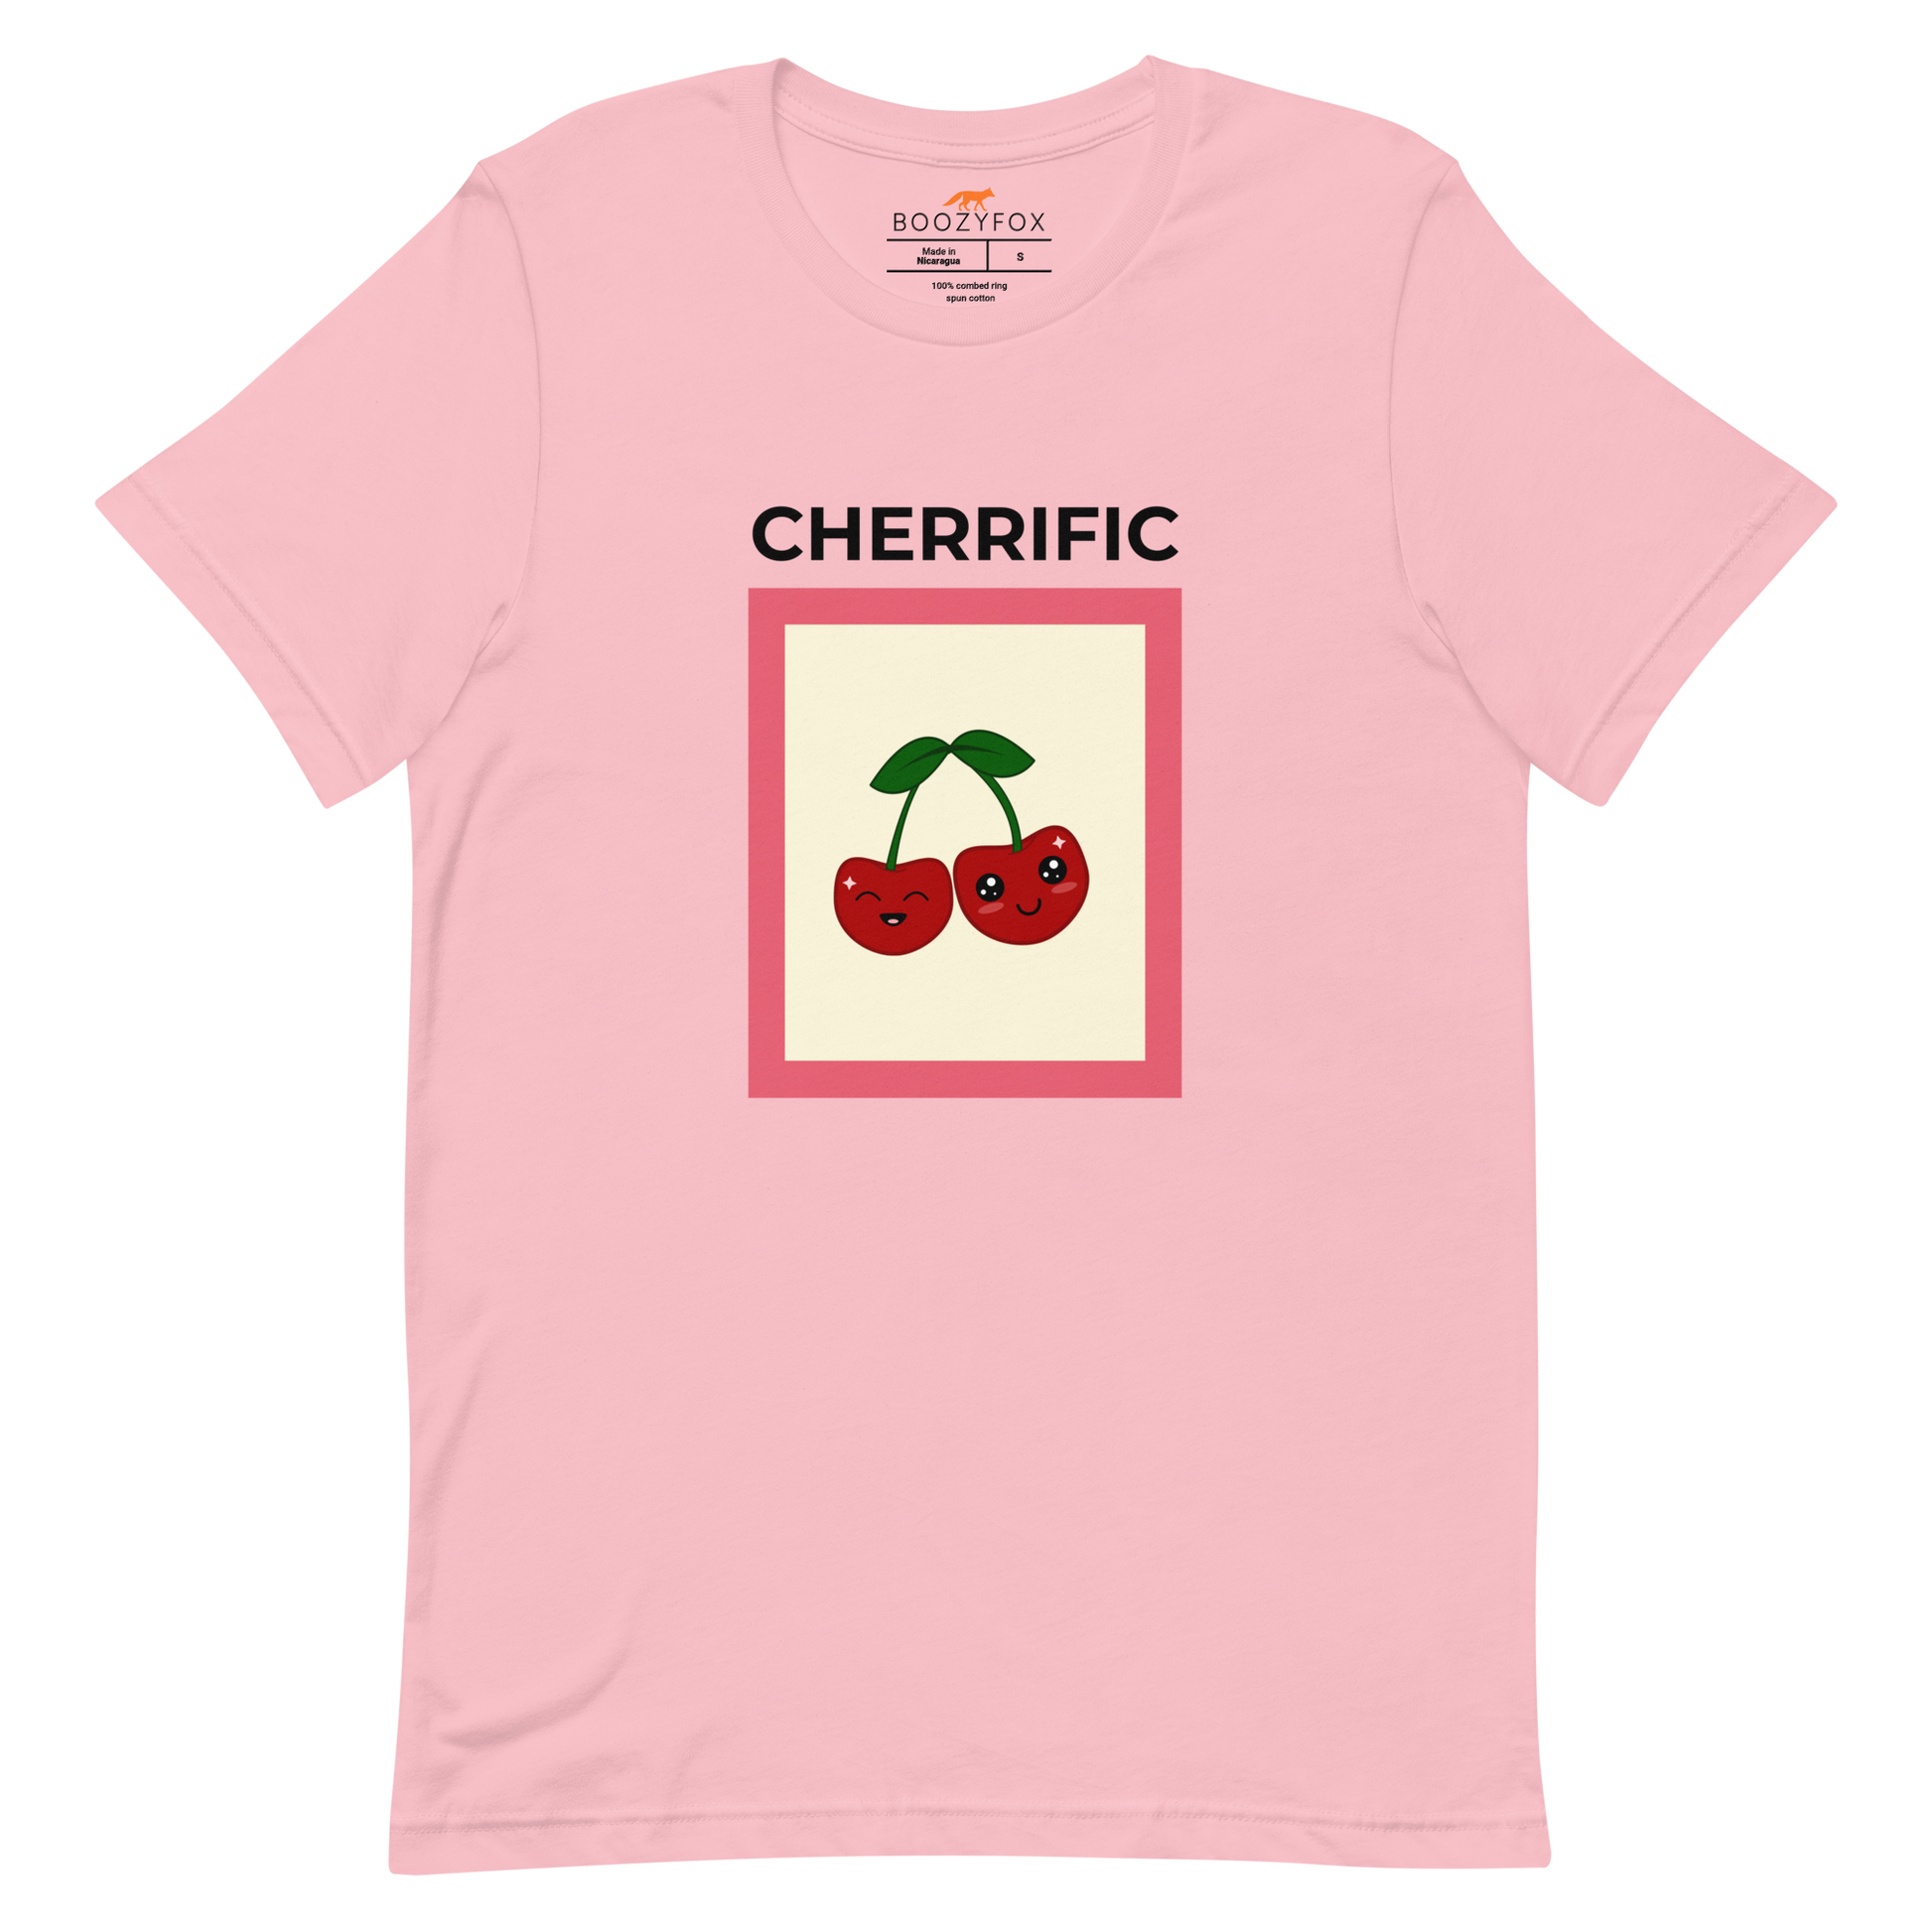 Pink Premium Cherry Tee featuring a Cherrific graphic on the chest - Funny Graphic Cherry Tees - Boozy Fox